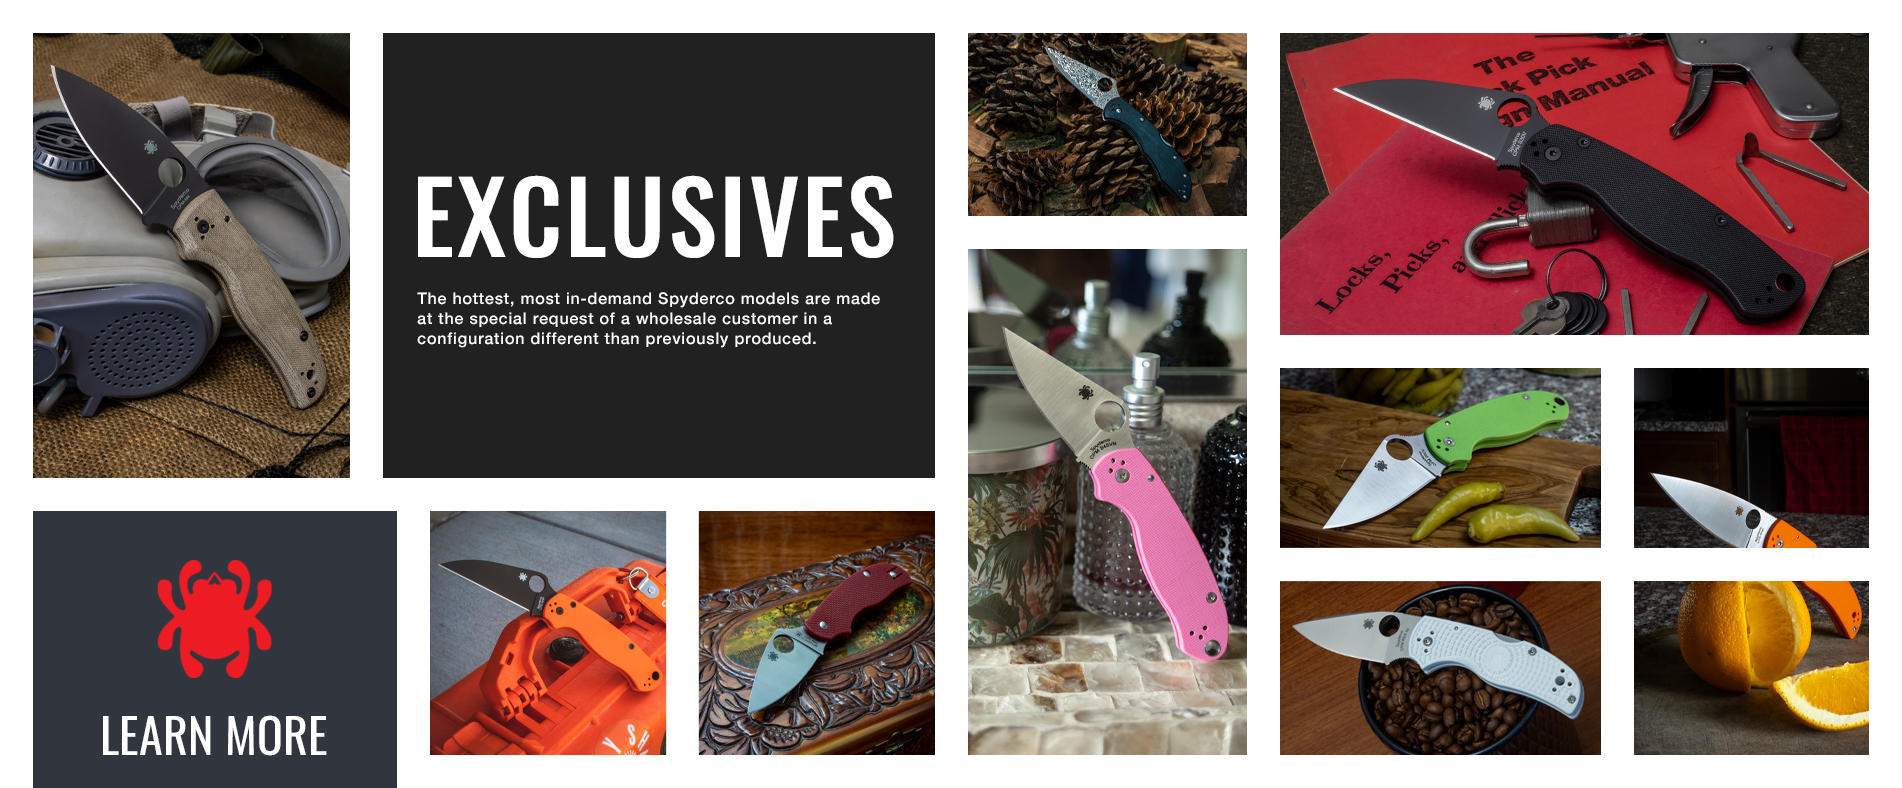 Spyderco Exclusives. Click to learn more about unique Spyderco products available exclusively at select Spyderco Dealers.